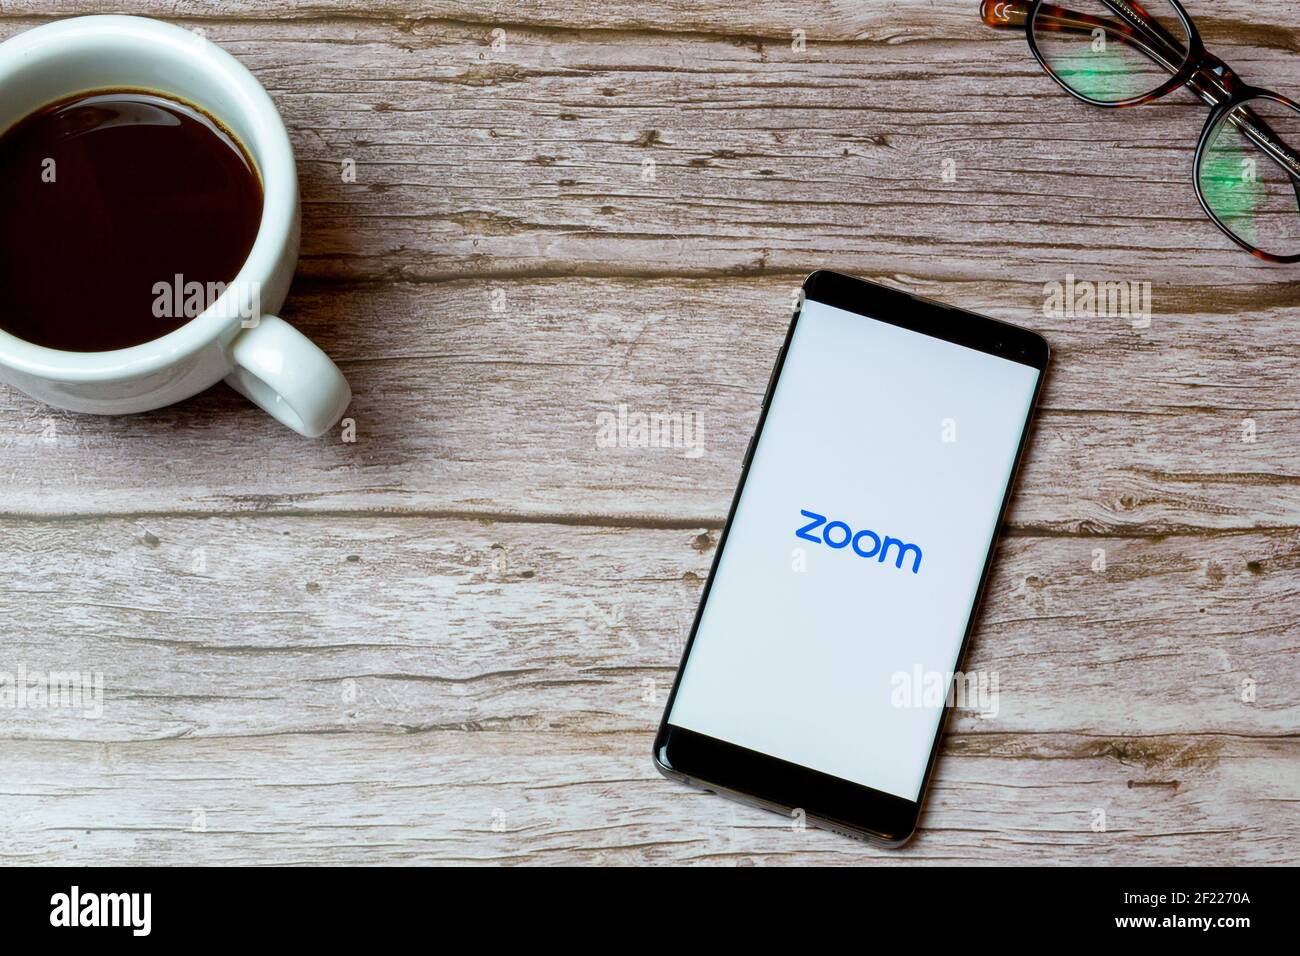 A Mobile phone or cell phone laid on a table or desk with the Zoom calling app open and a coffee next to it Stock Photo